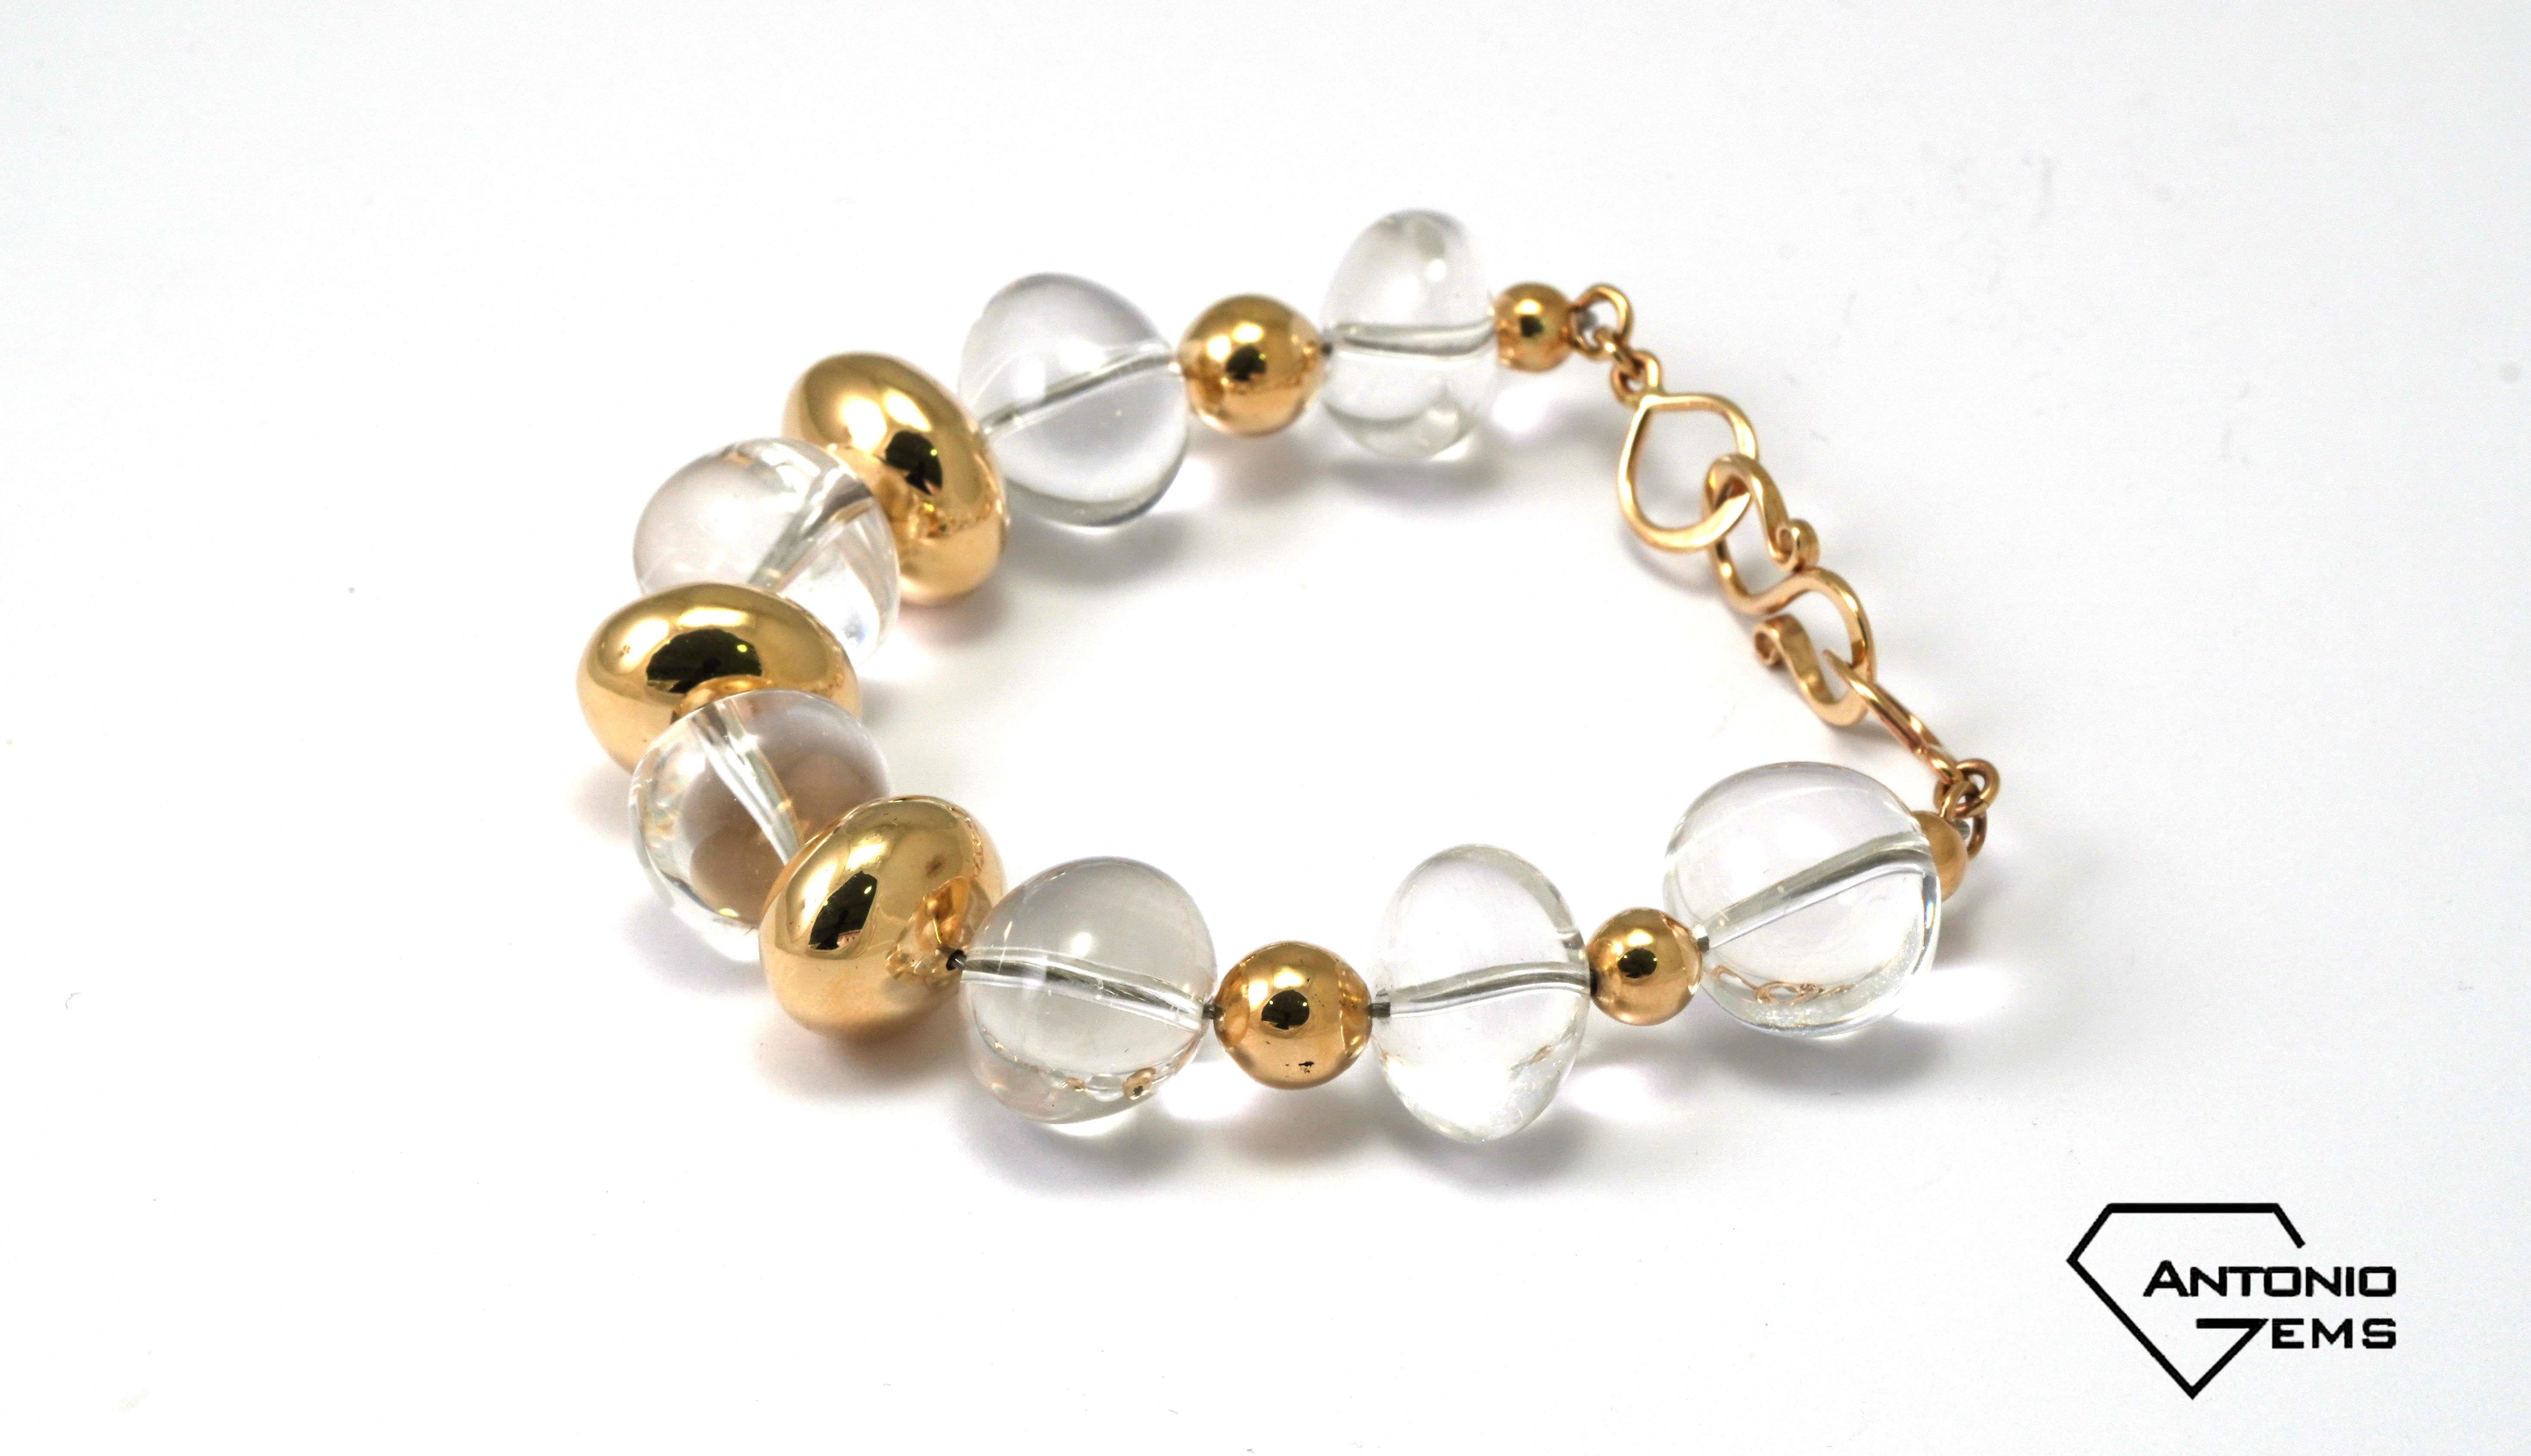 14 kt. Yellow Gold Bracelet with Rock Crystal
The bracelet is handmade.
Gold color: Yellow
Dimensions: 19 cm (Length). 
Total weight: 40,60 grams 
The Golden parts are hollow.

Set with:
- Rock Crystal
Cut: Cabochon